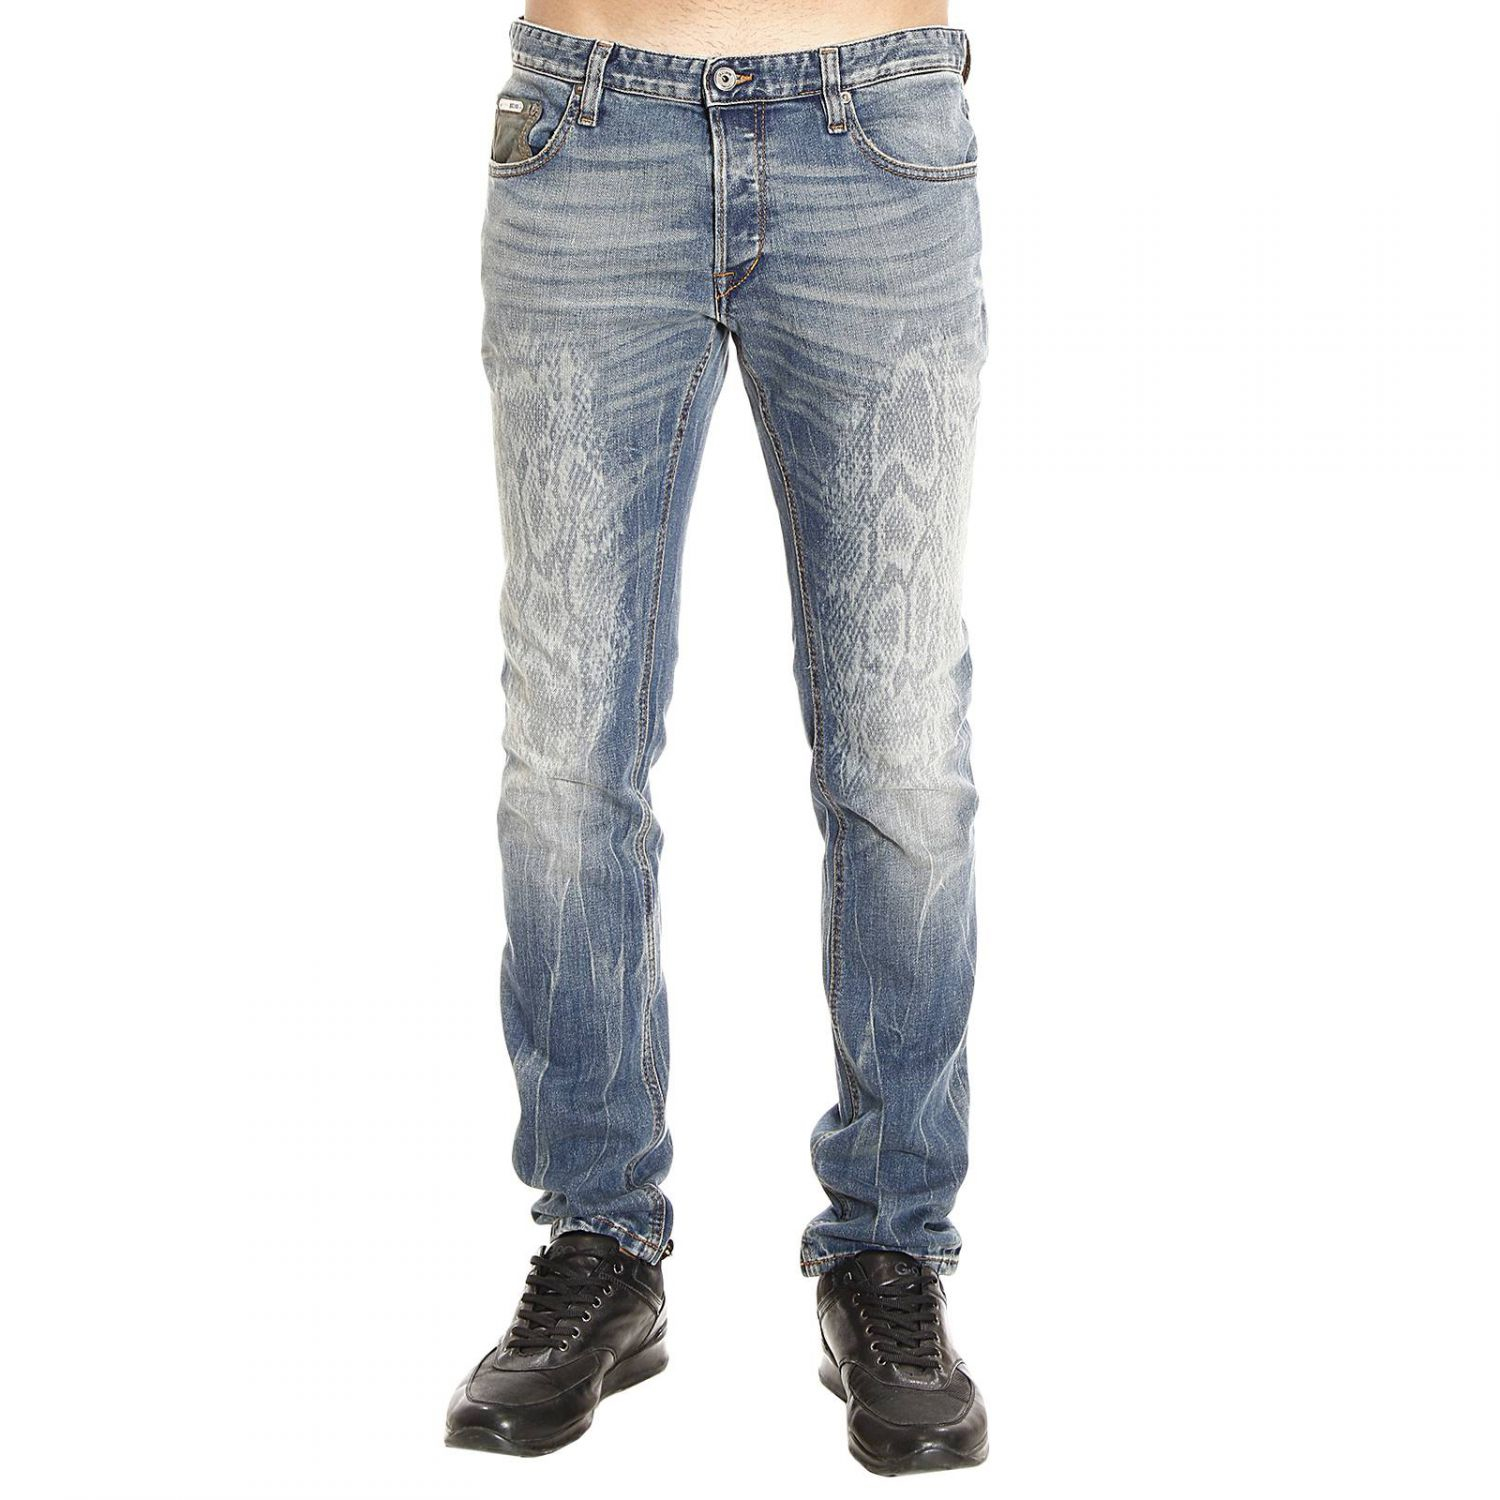 Just Cavalli Denim Jeans in Stone Washed (Blue) for Men - Lyst